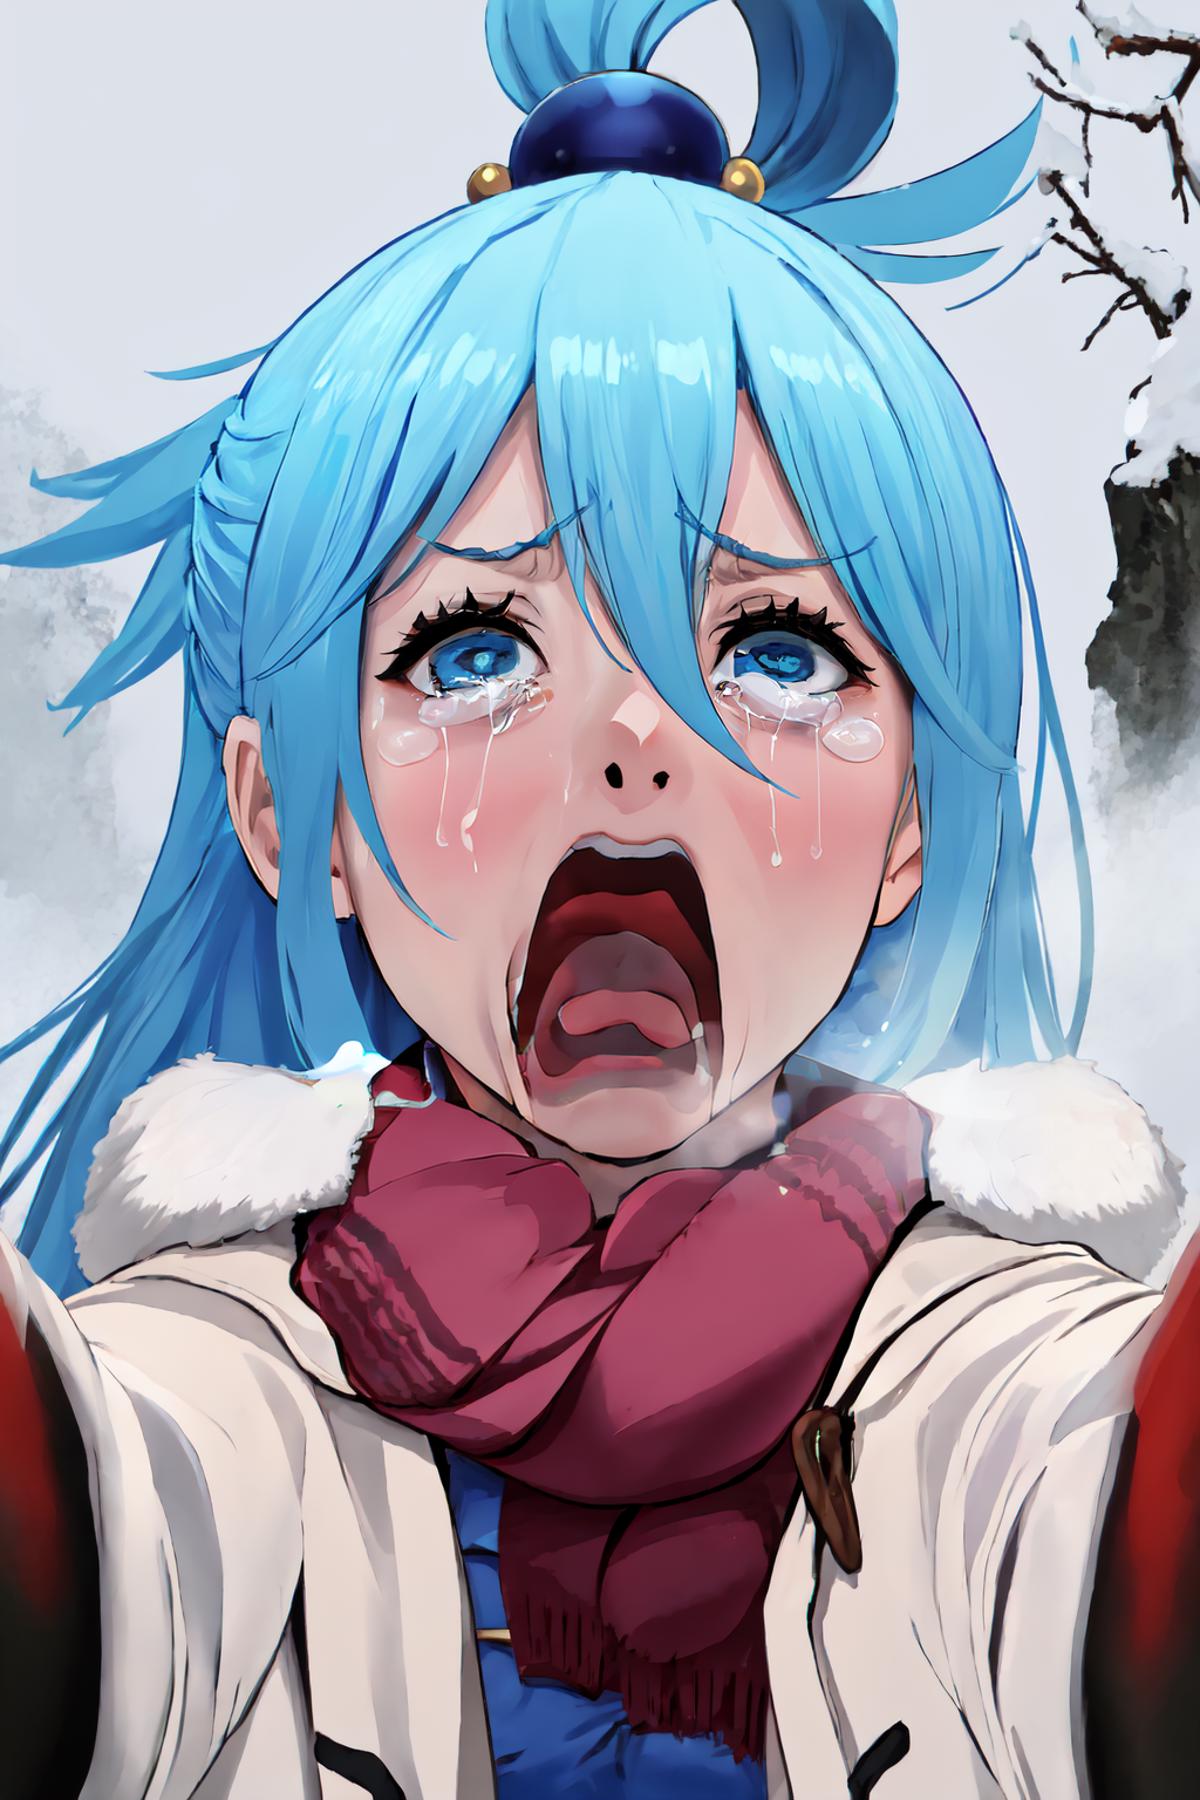 A blue-haired woman with tear-filled eyes in a white coat is screaming.